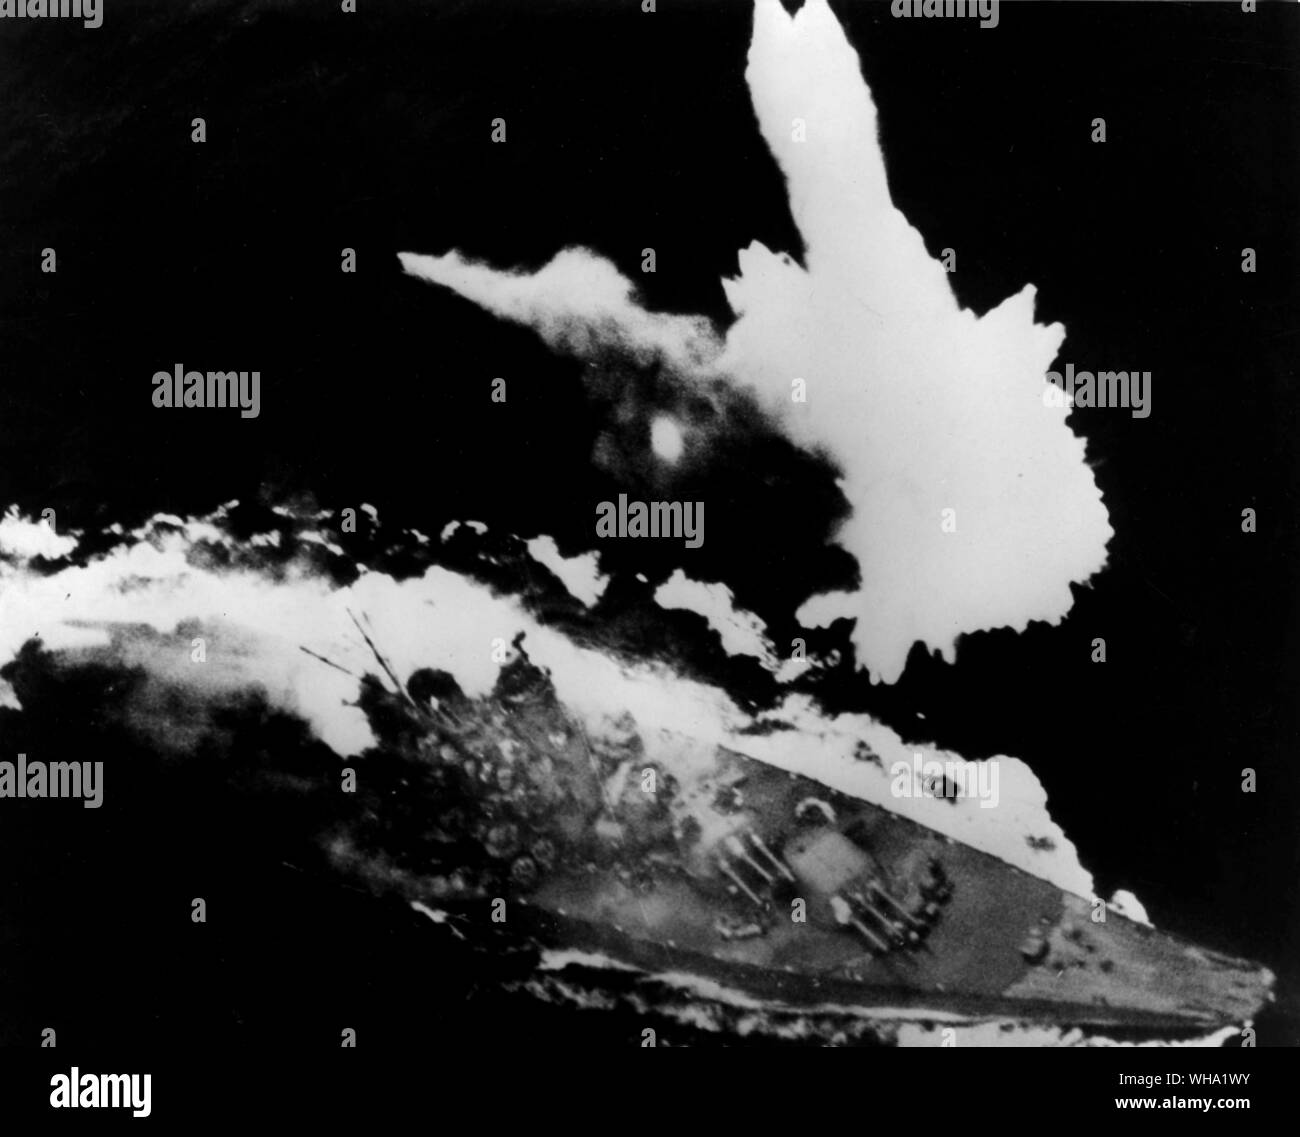 WW2: The navy has just revealed that the Japanese super-battleship, Yamato, used fuel oil extracted from soy-beans in its last engagement. The huge dreadnaught is shown fleeing from aerial bombs and torpedoes of the US Pacific fleet on April 7th, 1945, the day it was sunk. Stock Photo